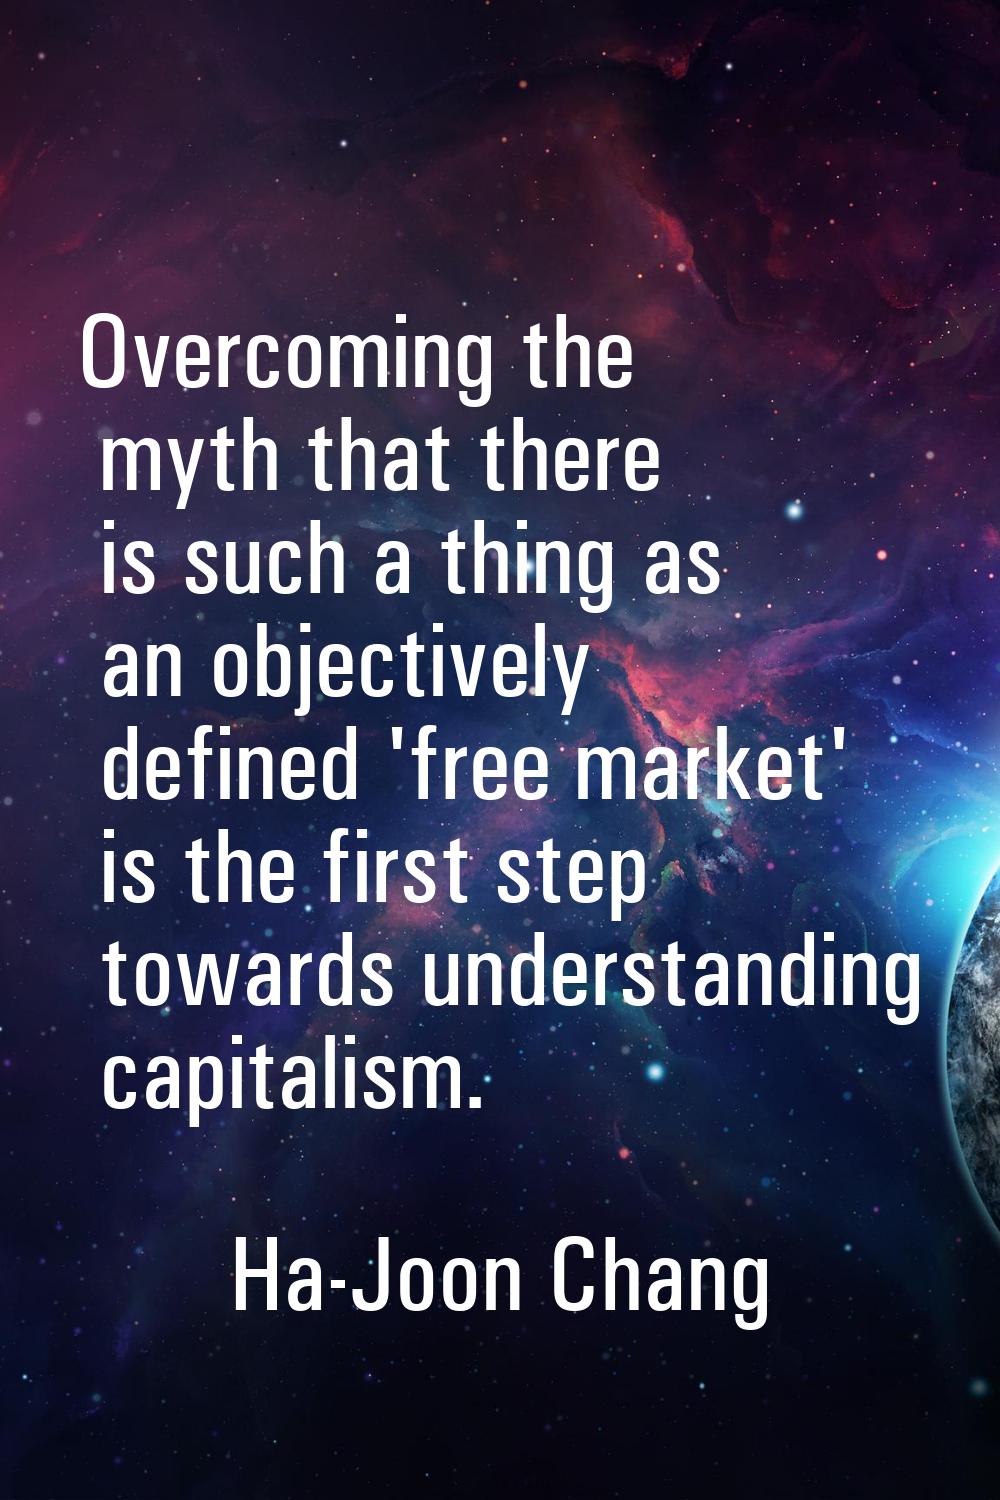 Overcoming the myth that there is such a thing as an objectively defined 'free market' is the first